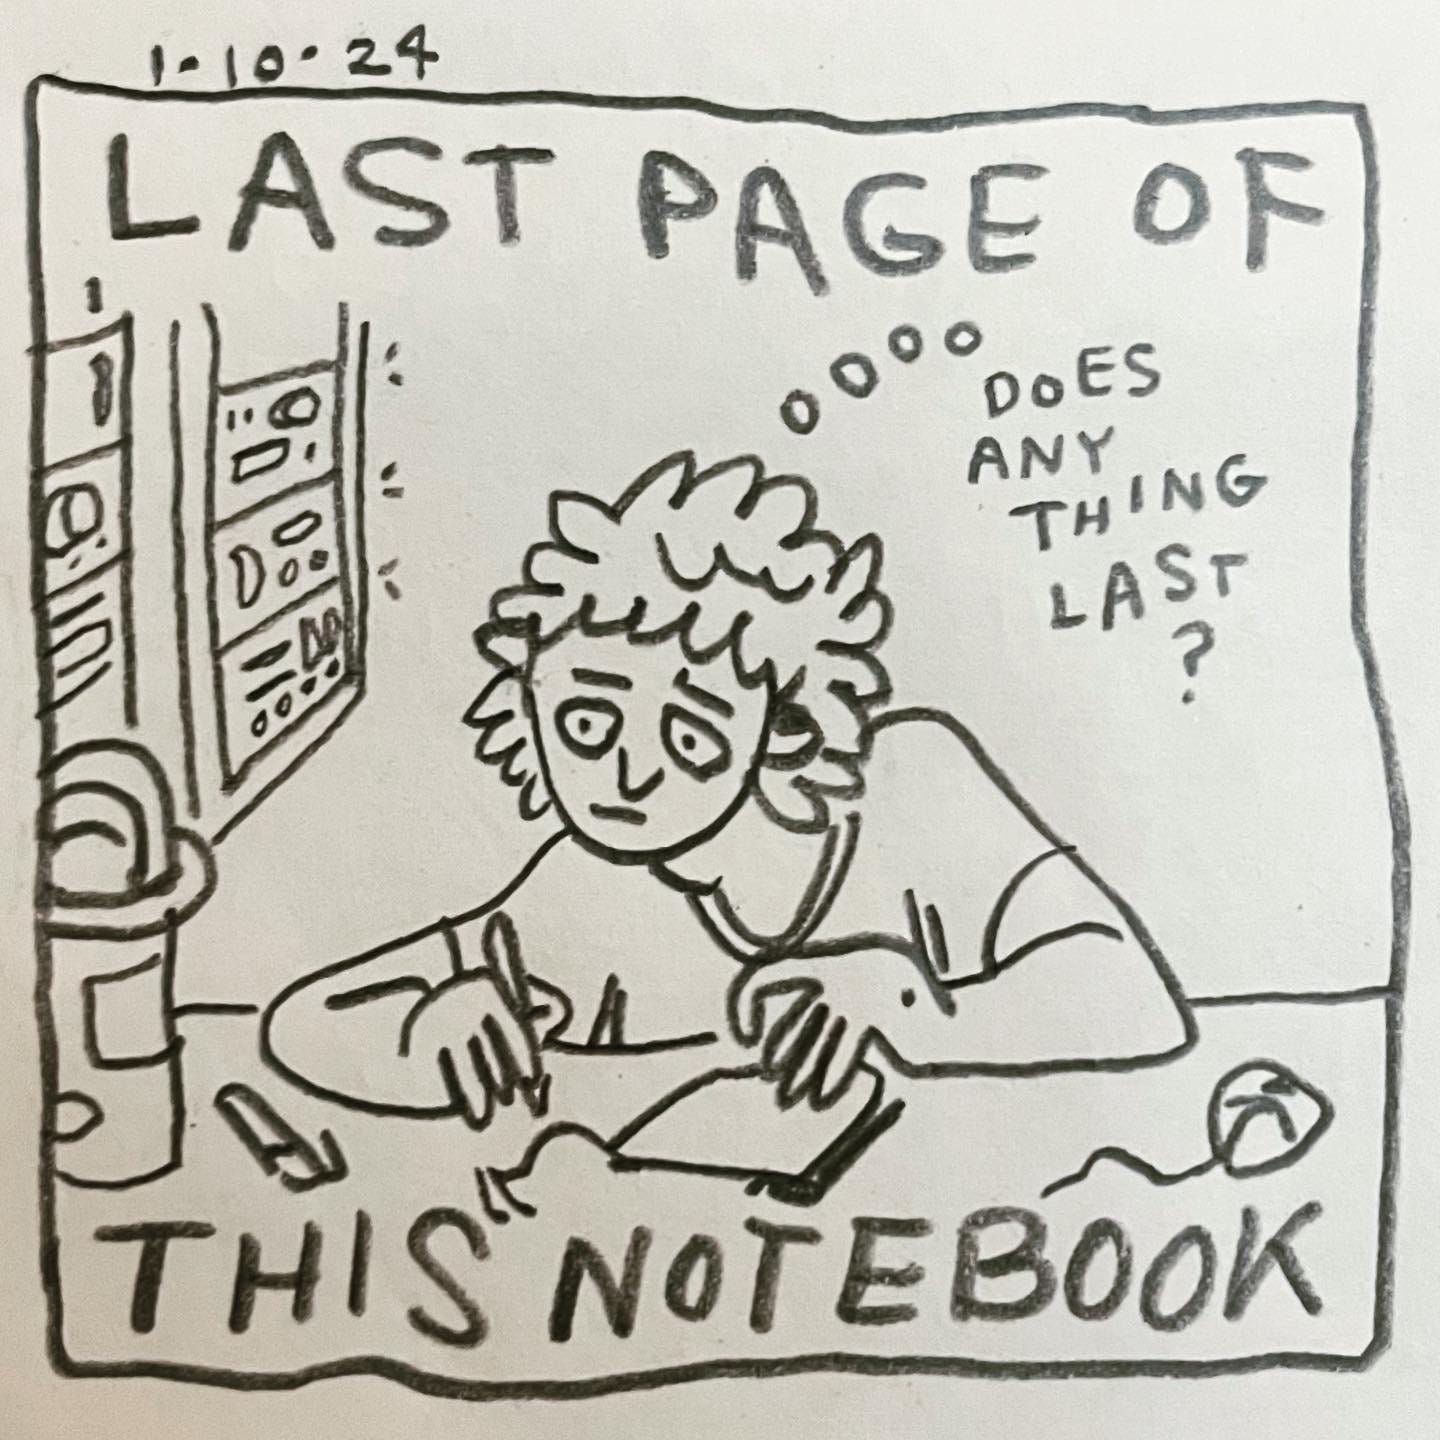 Panel 1: last page of this notebook Image: Lark is sitting hunched over a notebook, gazing into the distance. A water bottle, computer mouse, and pen sit on the table. Lights blink on a rack of equipment behind them. They are thinking, "does anything last?"